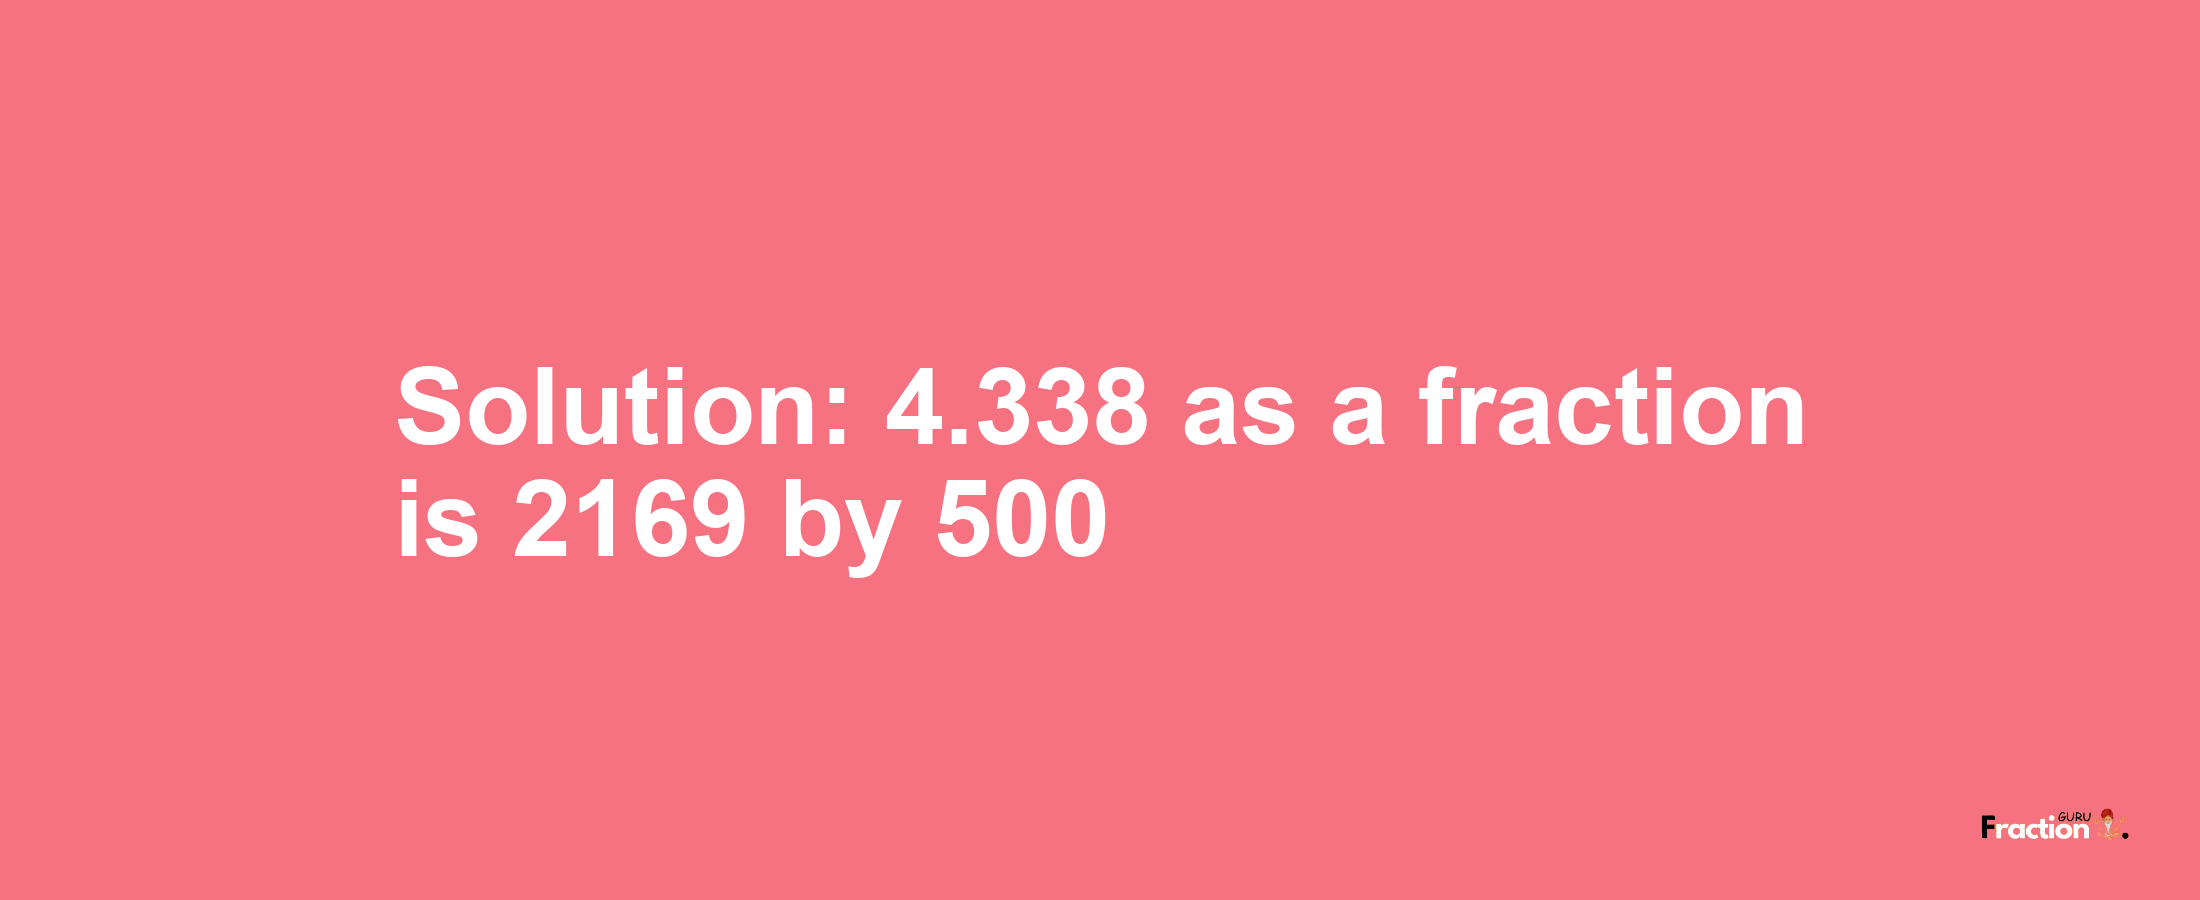 Solution:4.338 as a fraction is 2169/500